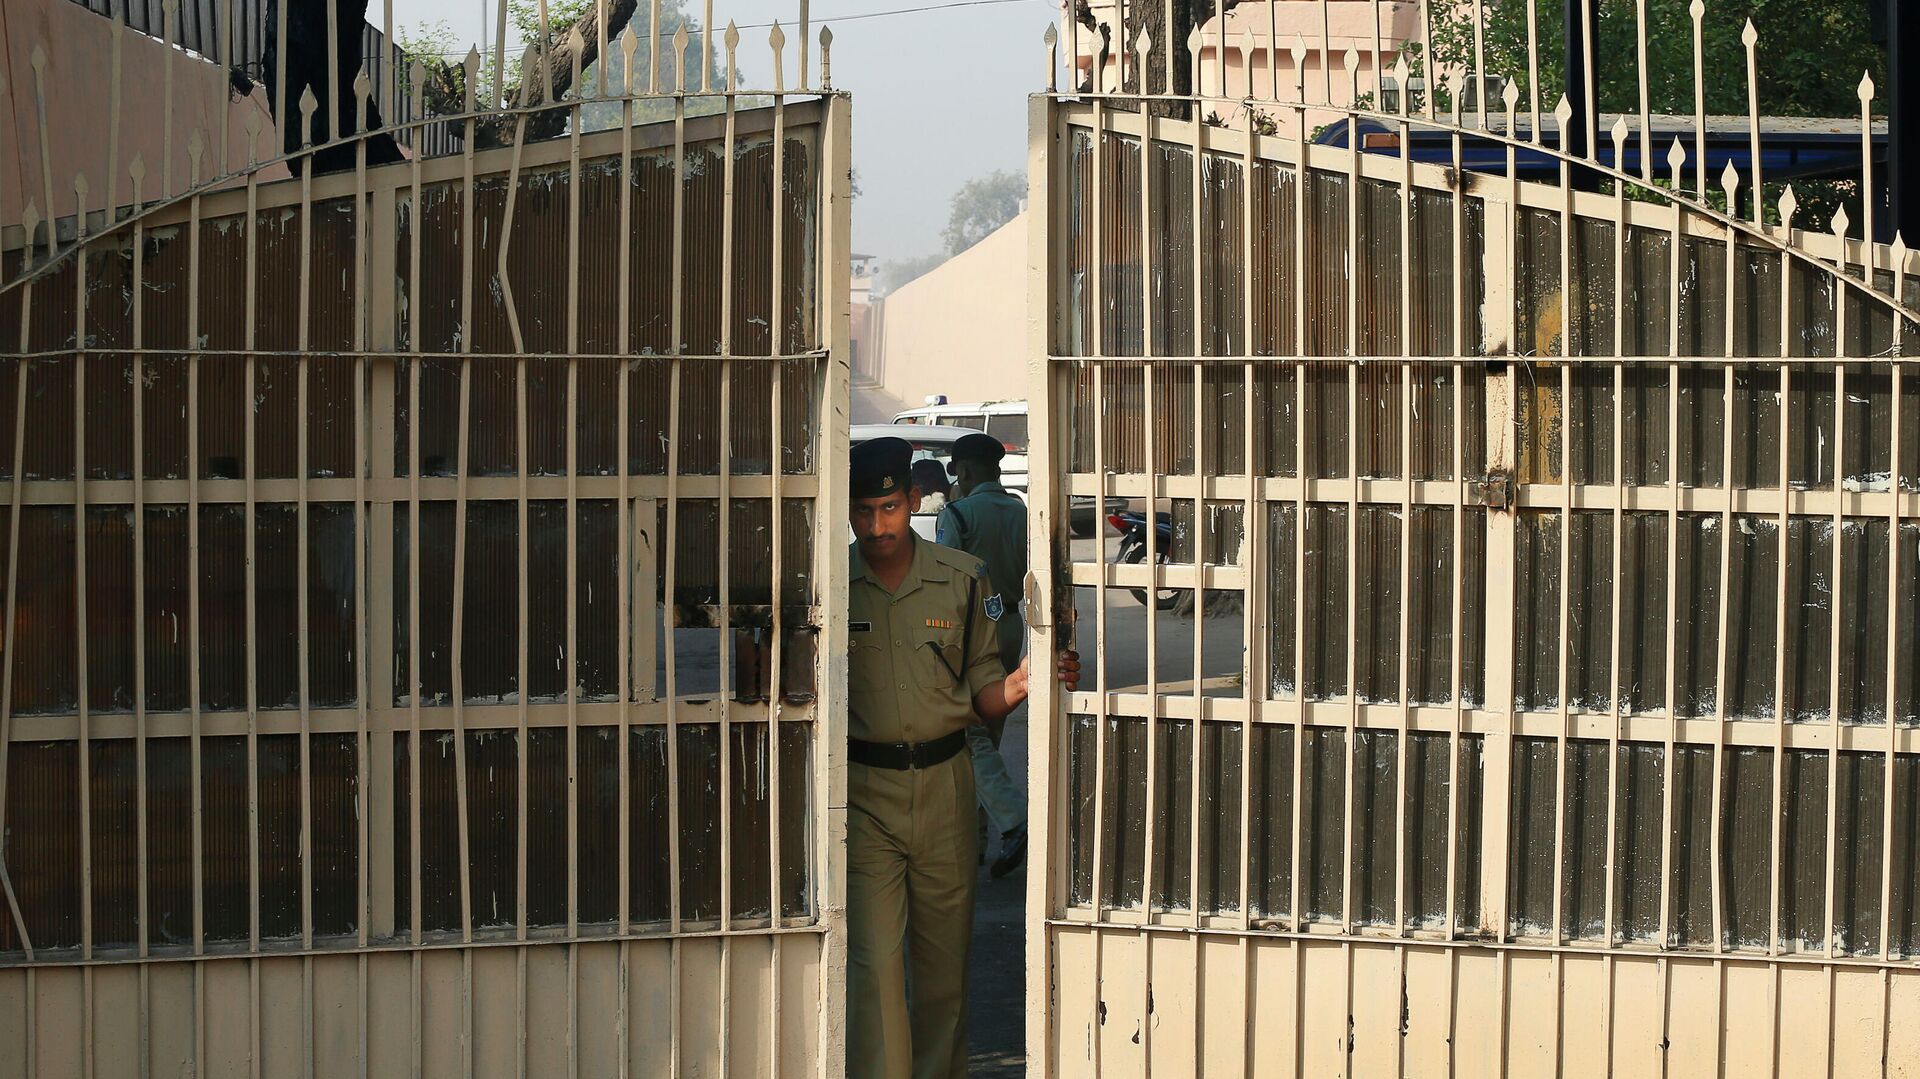 An Indian police officer prepares to close one of the gates at Tihar Jail, the largest complex of prisons in South Asia, in New Delhi, India, Monday, March 11, 2013 - اسپوتنیک افغانستان  , 1920, 04.01.2023